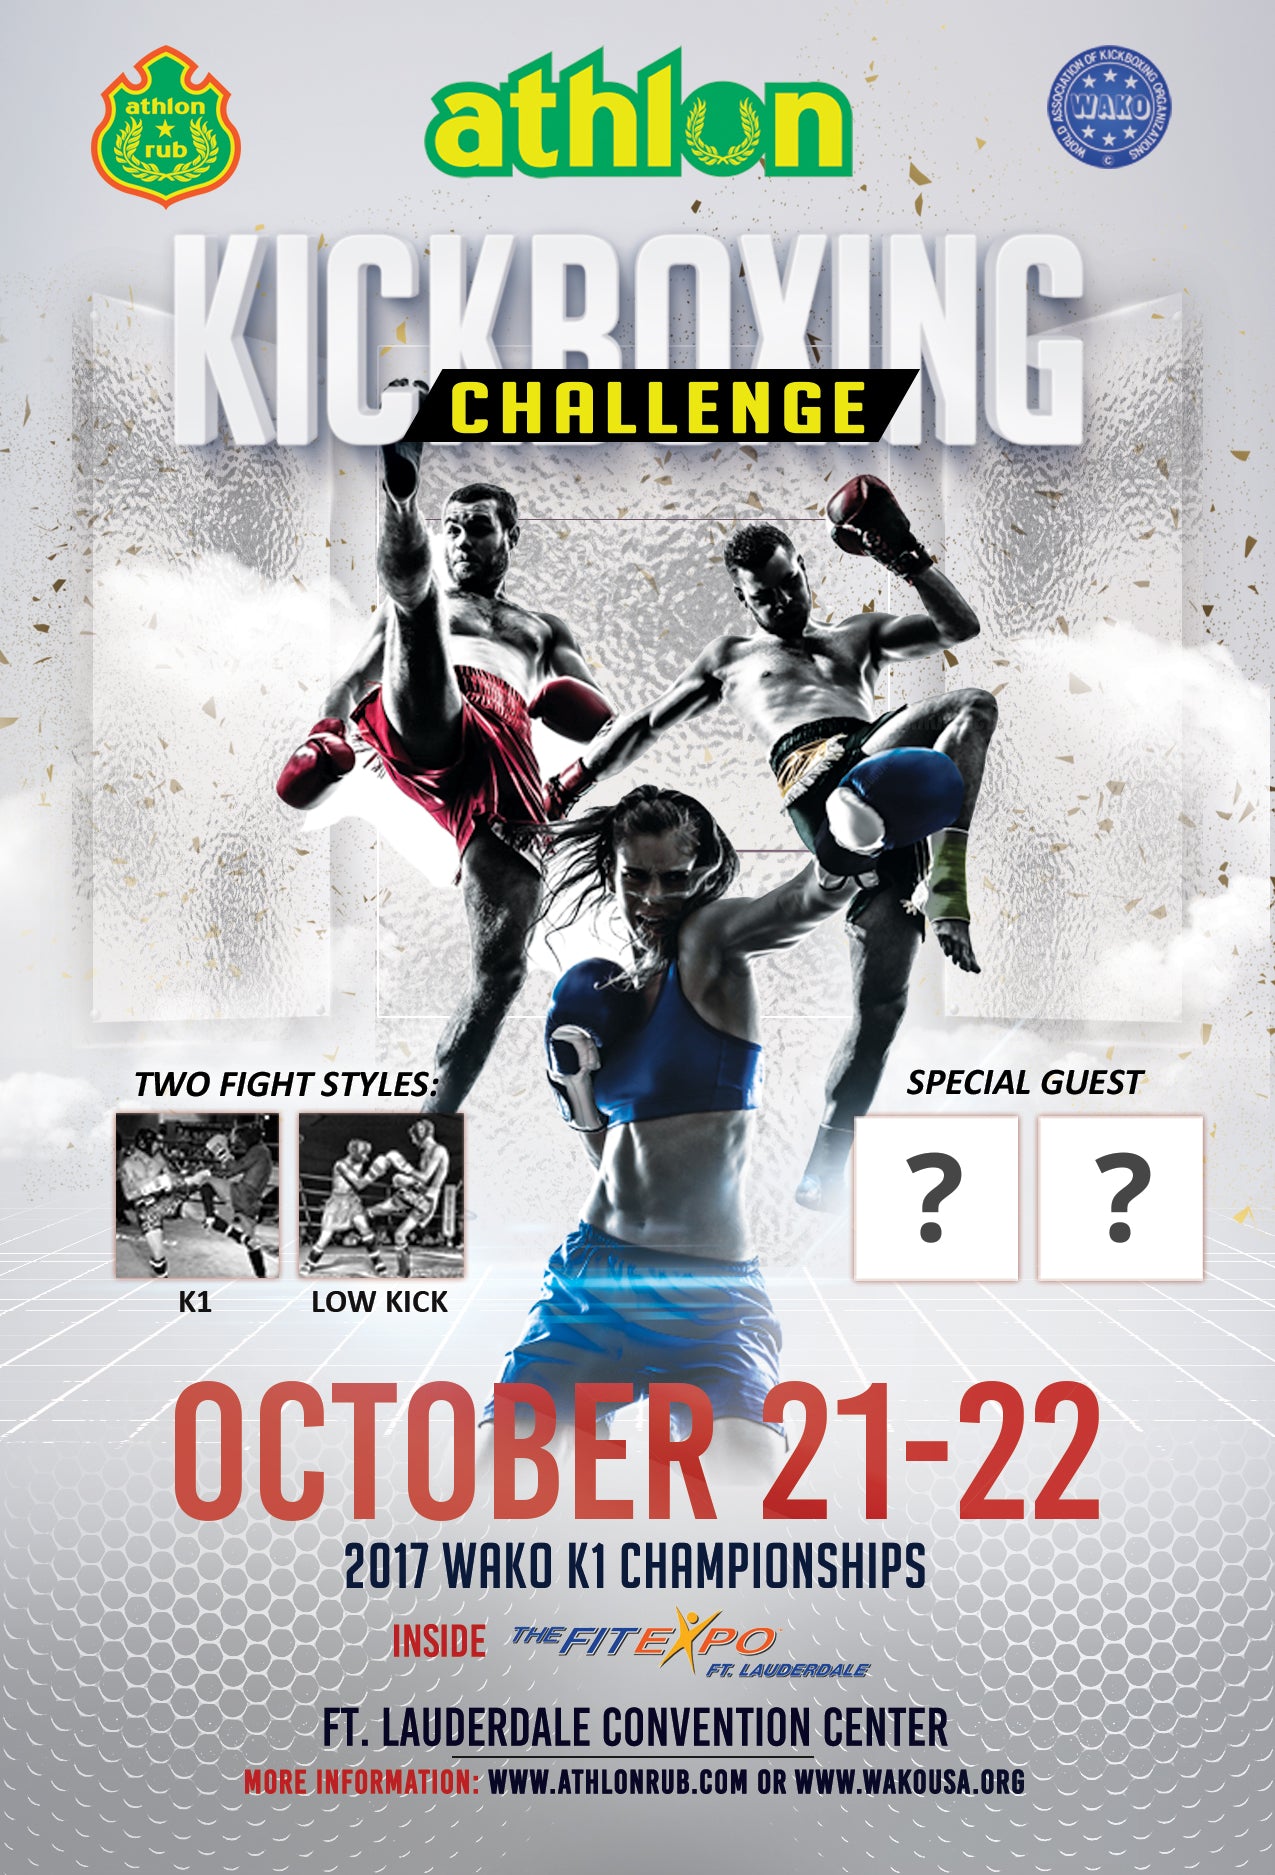 2017 Athlon Kickboxing Challenge To Take Place During TheFitExpo Ft. Lauderdale!